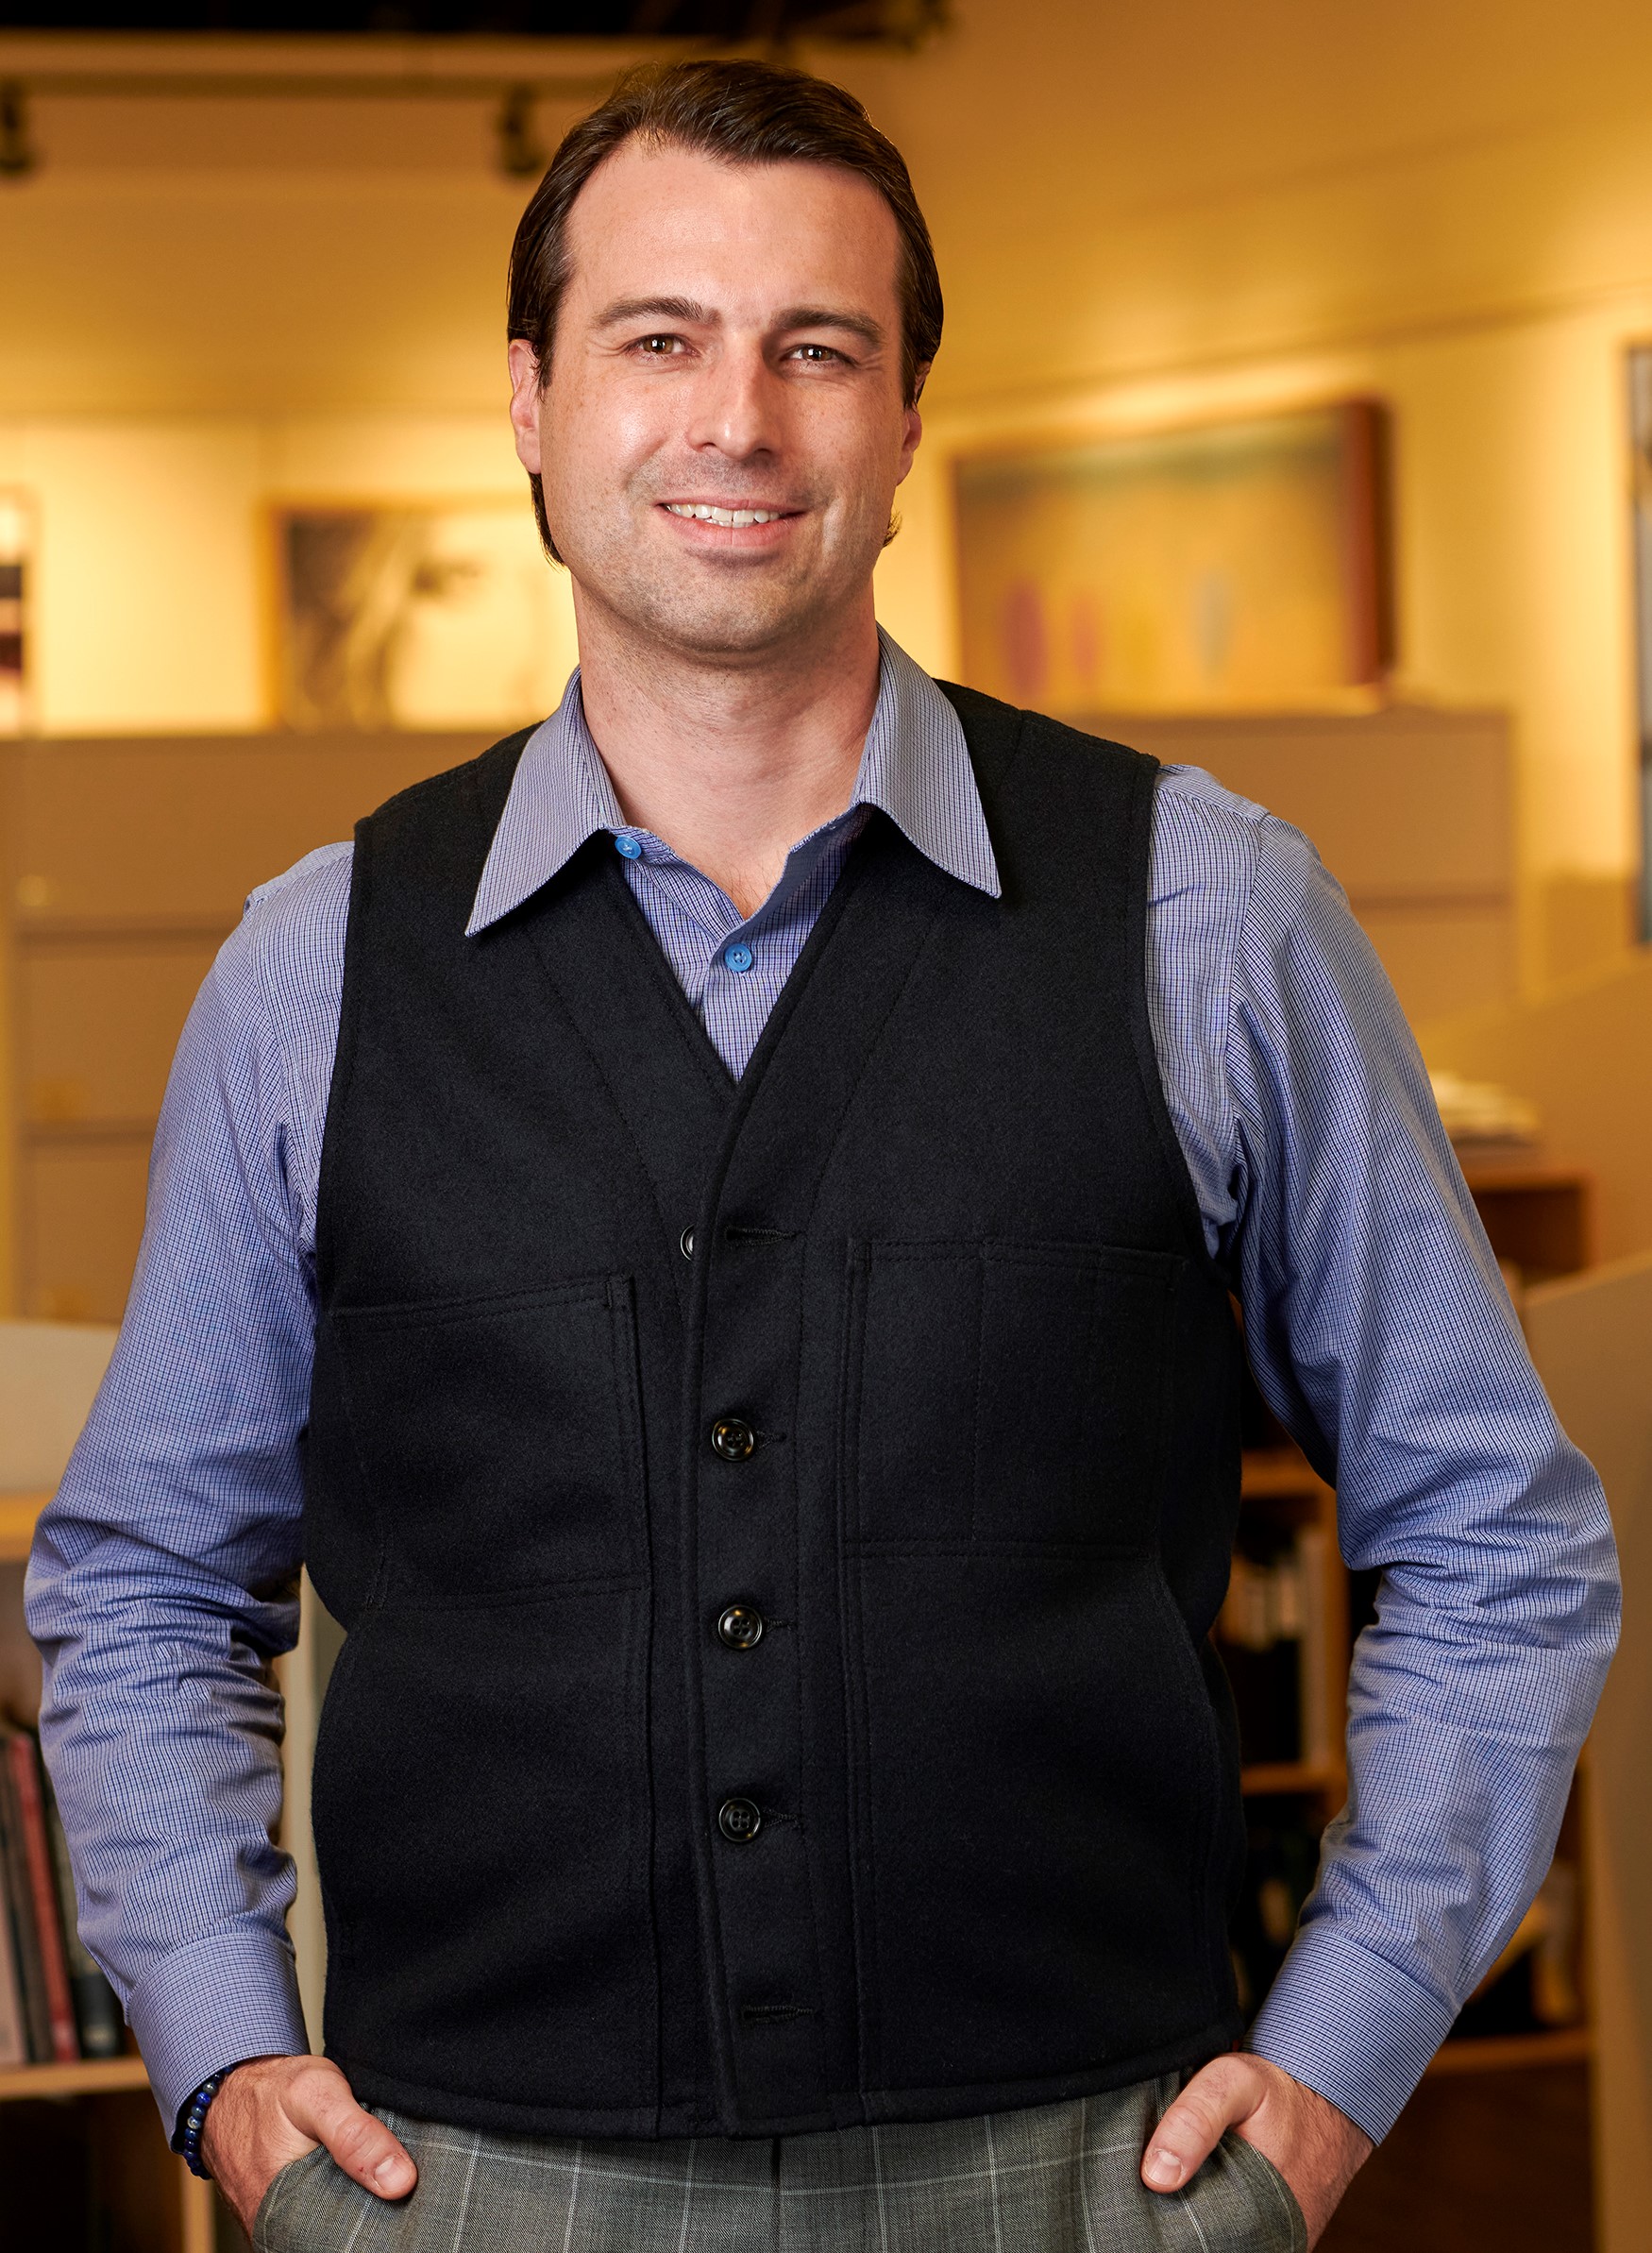 Keith Busch - Tall, white male with brown hair wearing a blue shirt, black vest and grey pants. He smiling,  is  standing in an office, with hand in his pockets. The picture has a blurred background.